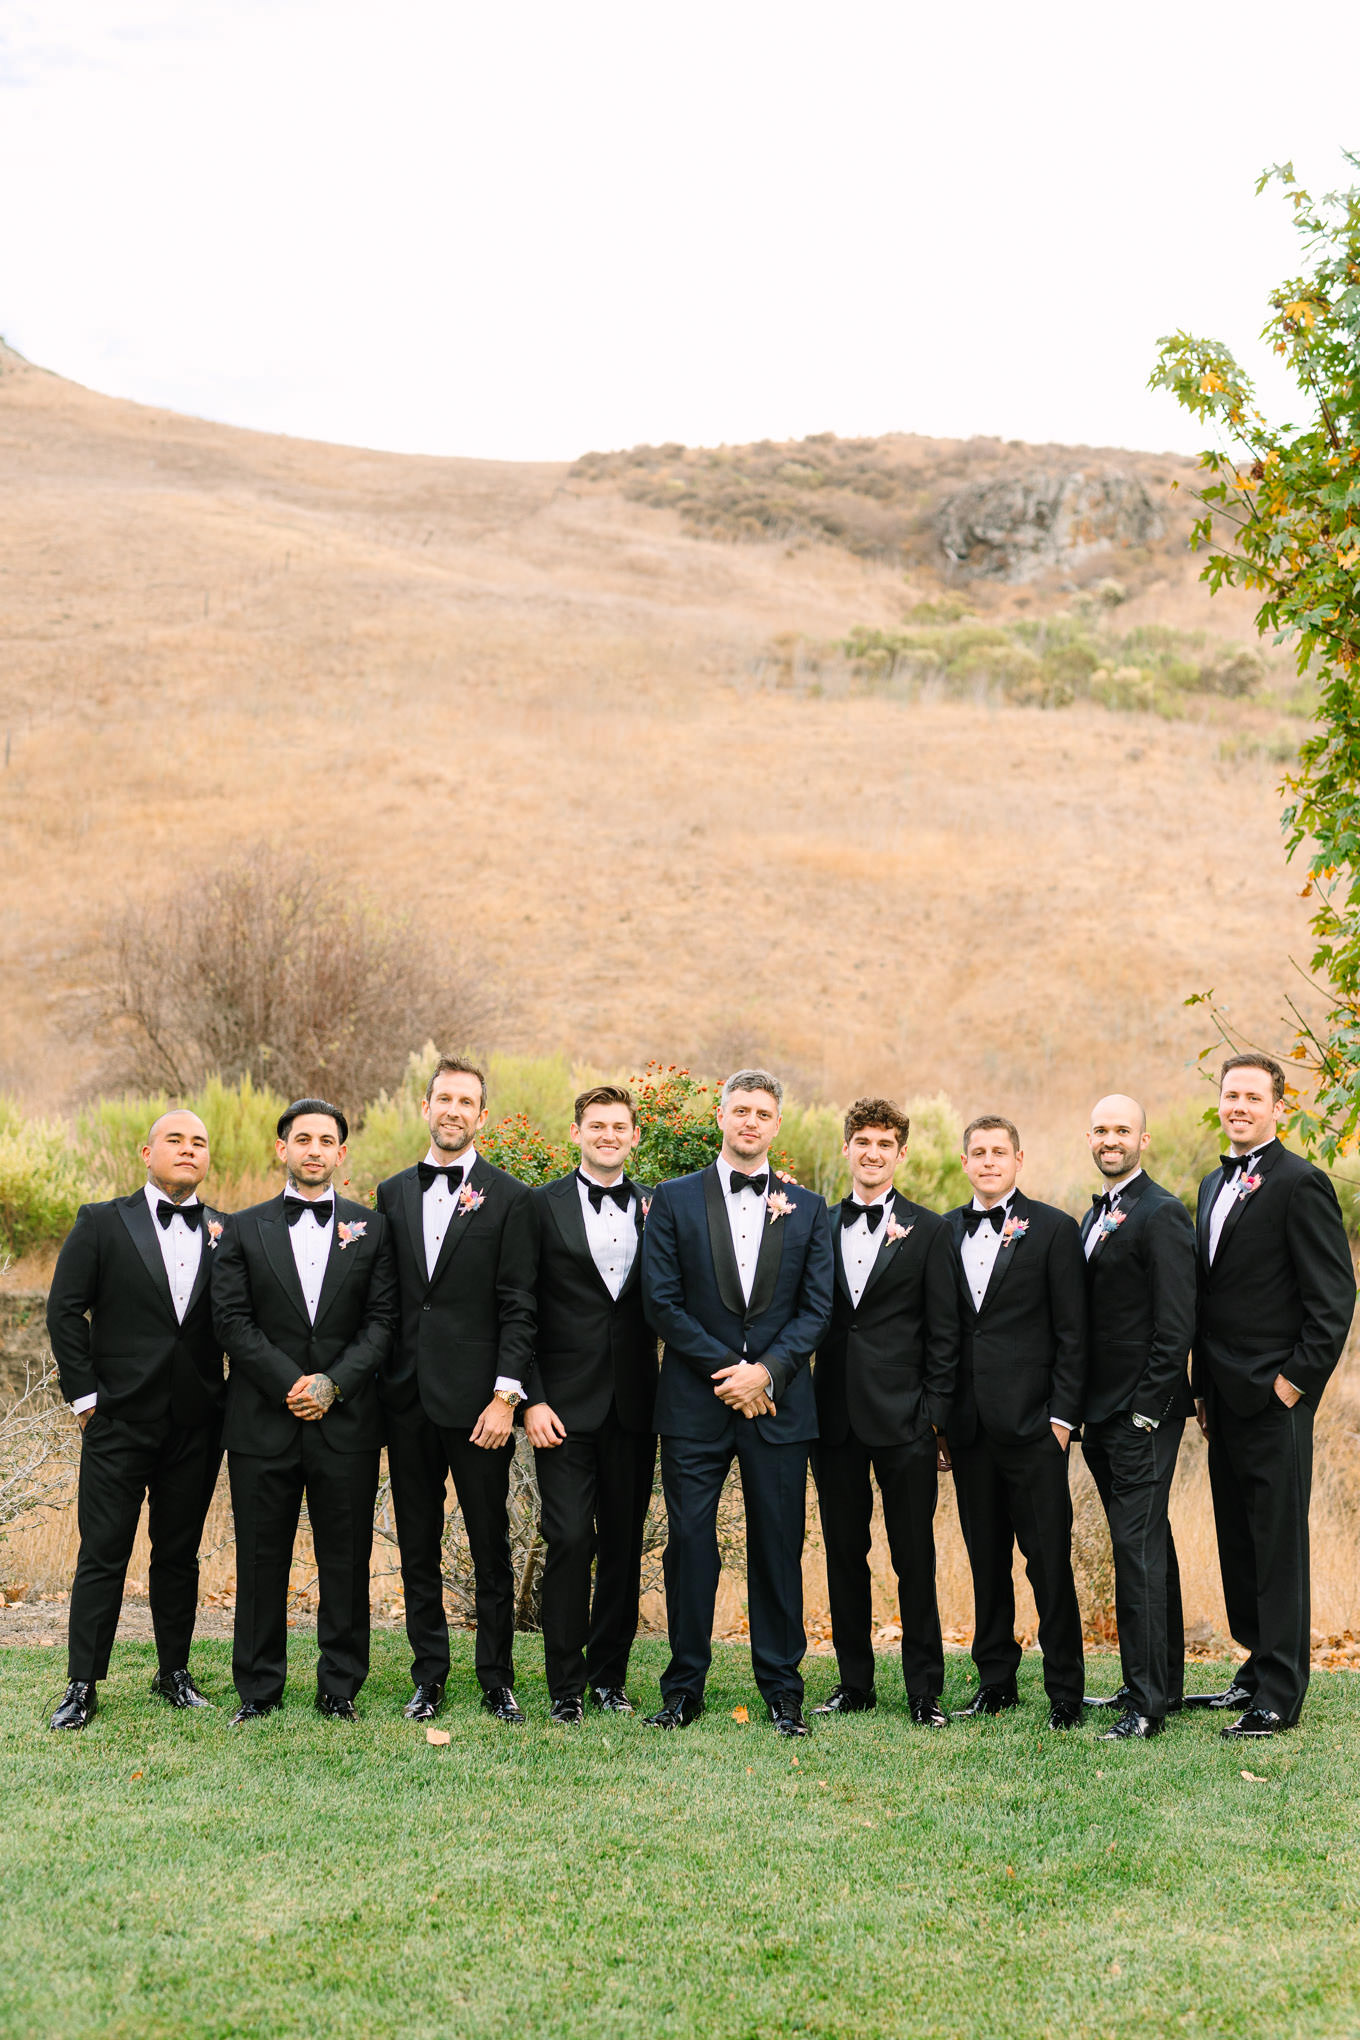 Dapper groomsmen in black tuxedos | Colorful and quirky wedding at Higuera Ranch in San Luis Obispo | #sanluisobispowedding #californiawedding #higueraranch #madonnainn   
Source: Mary Costa Photography | Los Angeles